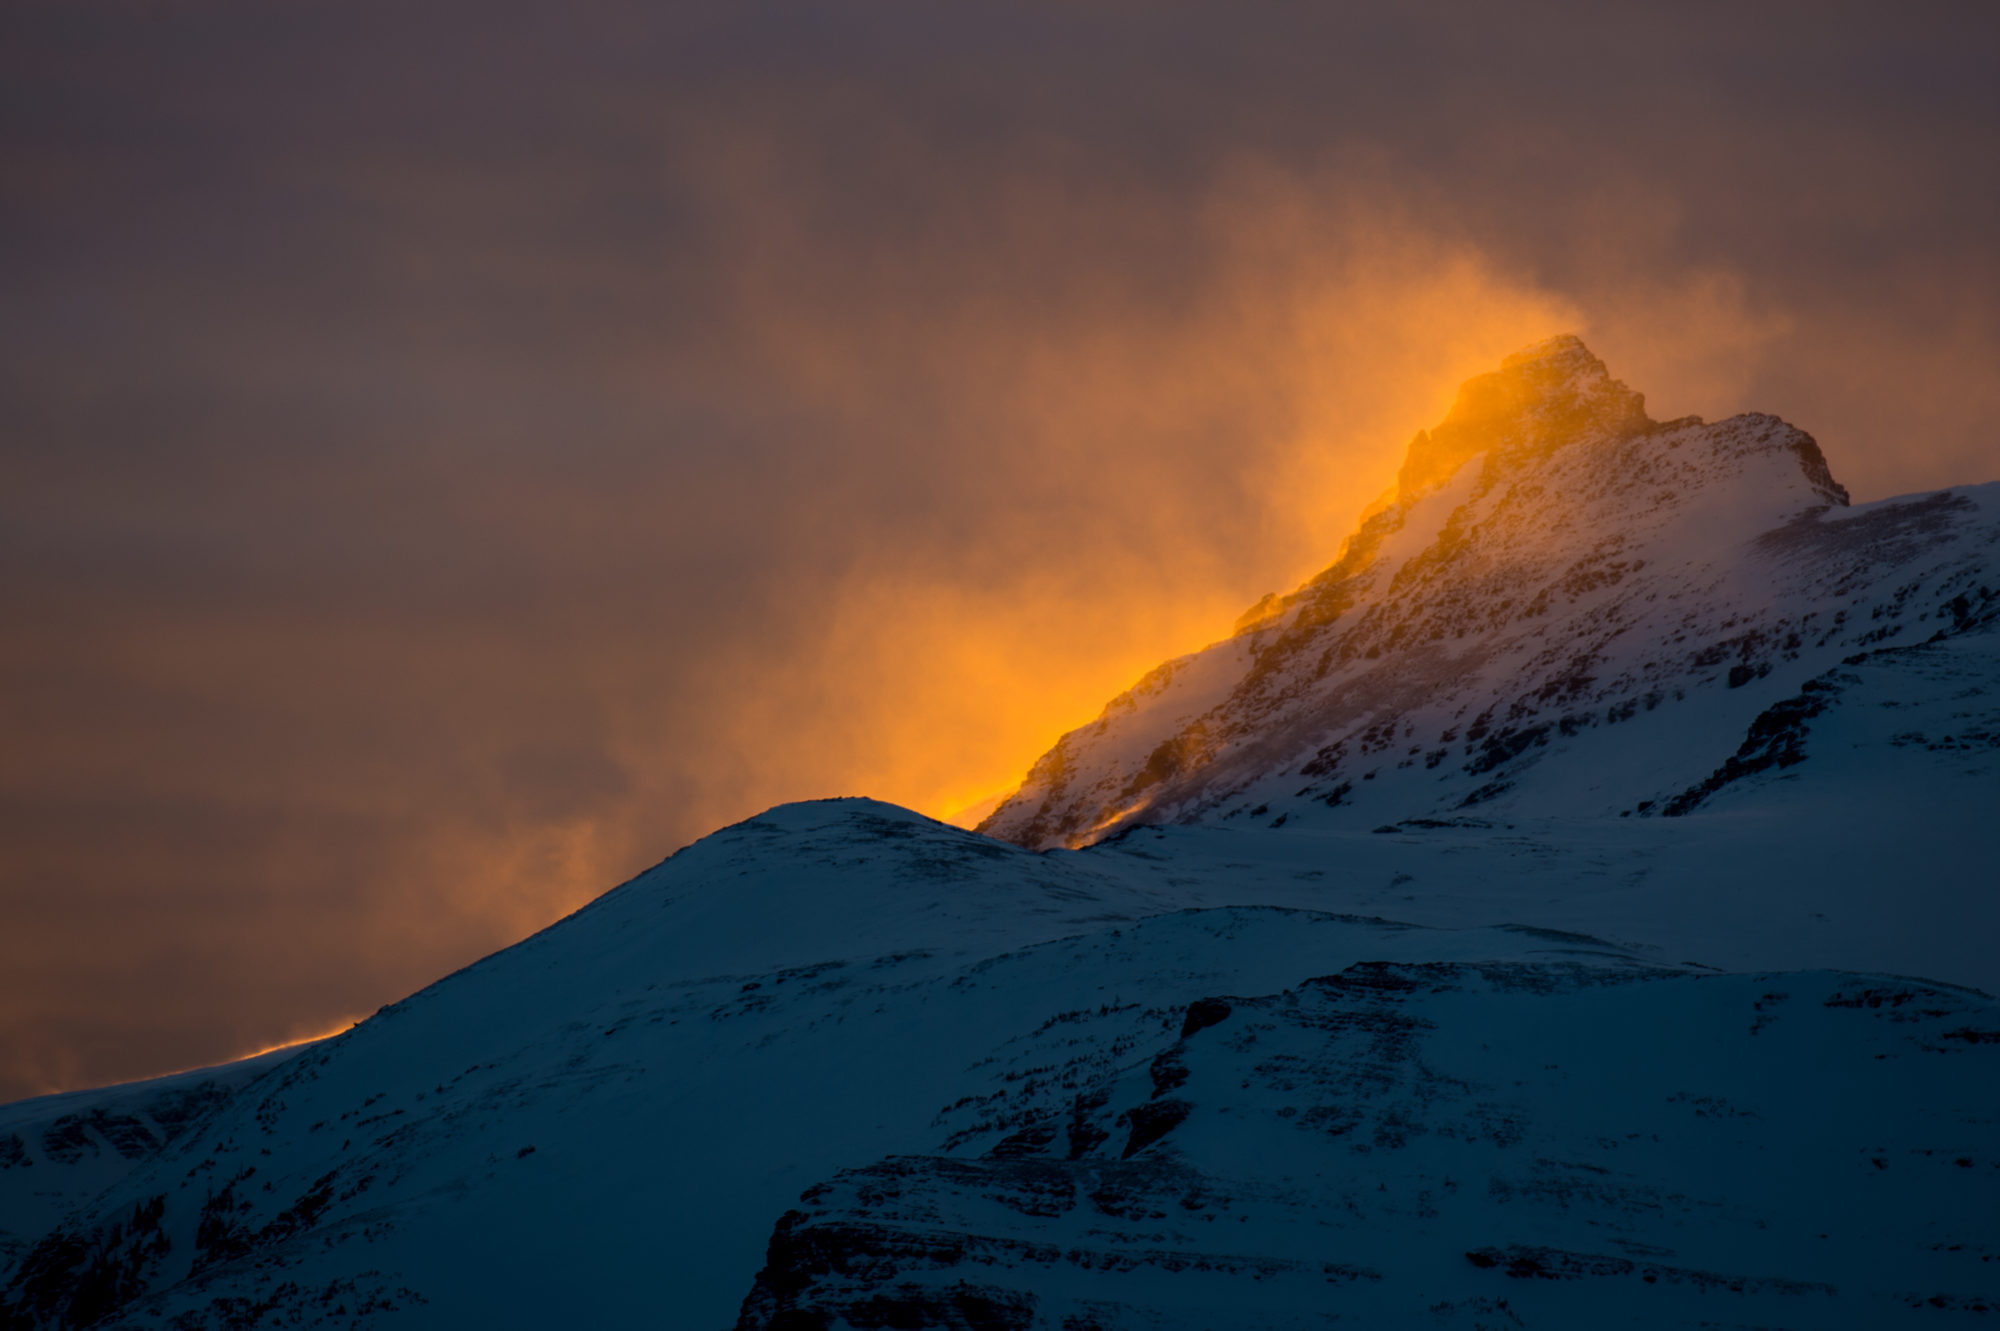 sun setting behind a peak offering a great opportunity for mountainscape photography